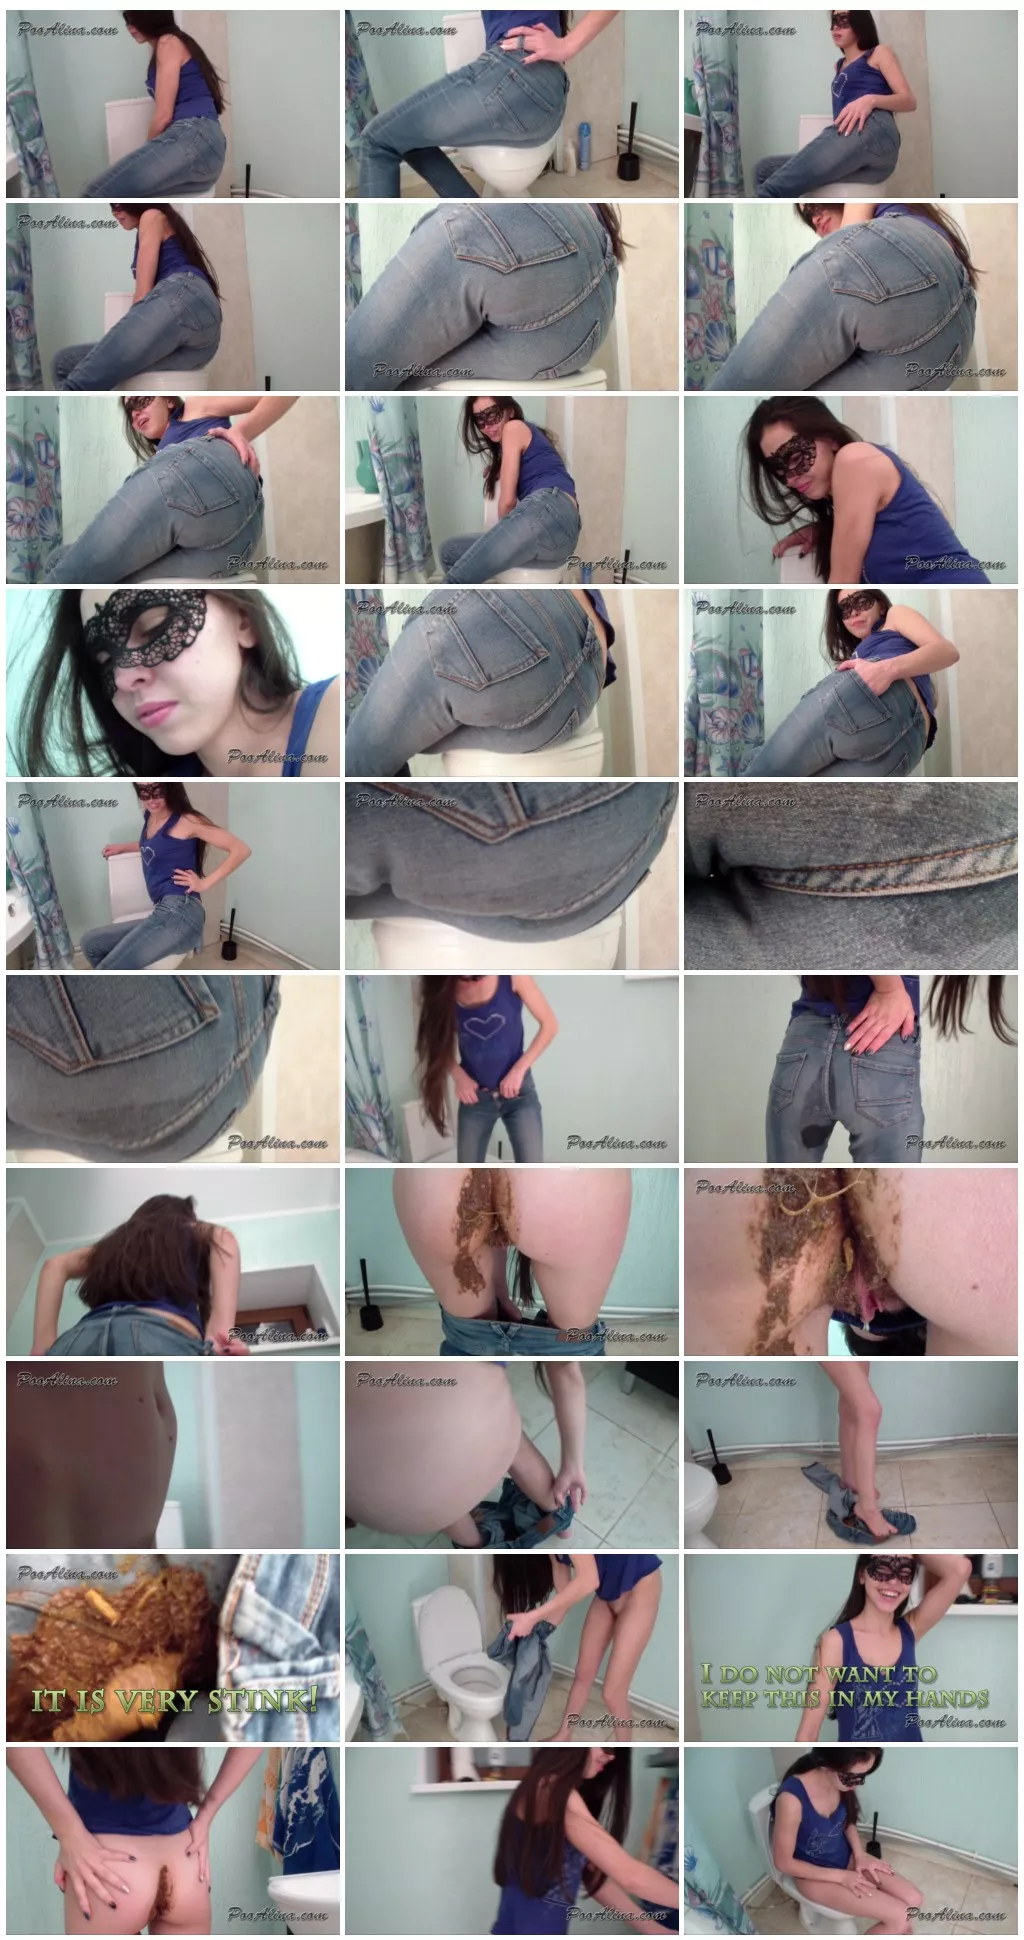 Alina pooping and fart in jeans after a fish with beer [Scat solo, shit, defecation,Masturbation ,Piss,Jeans in shit]